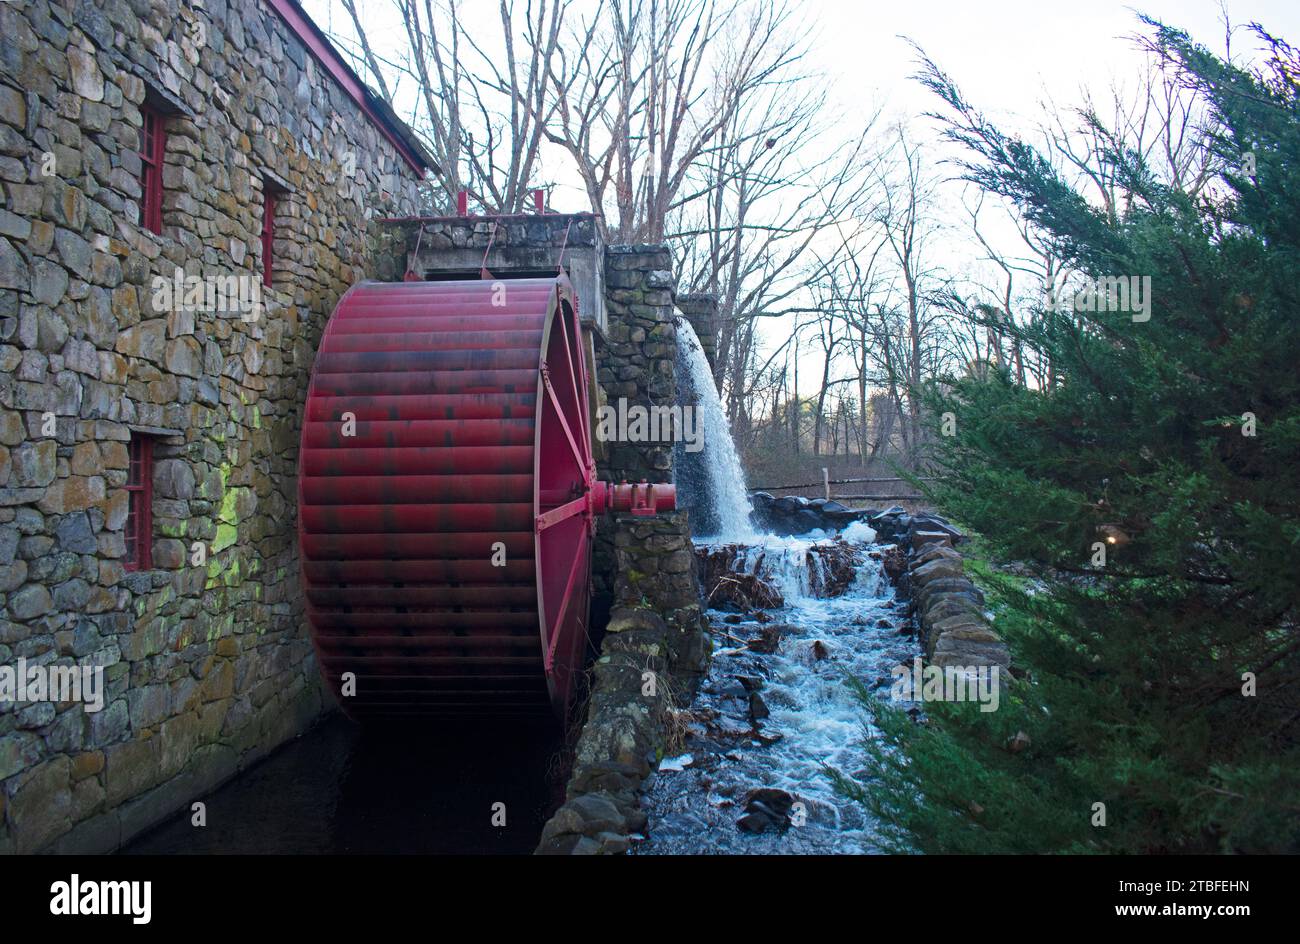 Historic landmark grist mill sporting a red wooden wheel, in Sudbury, Massachusetts, that is still in operation, producing cornmeal and wheat flour -0 Stock Photo